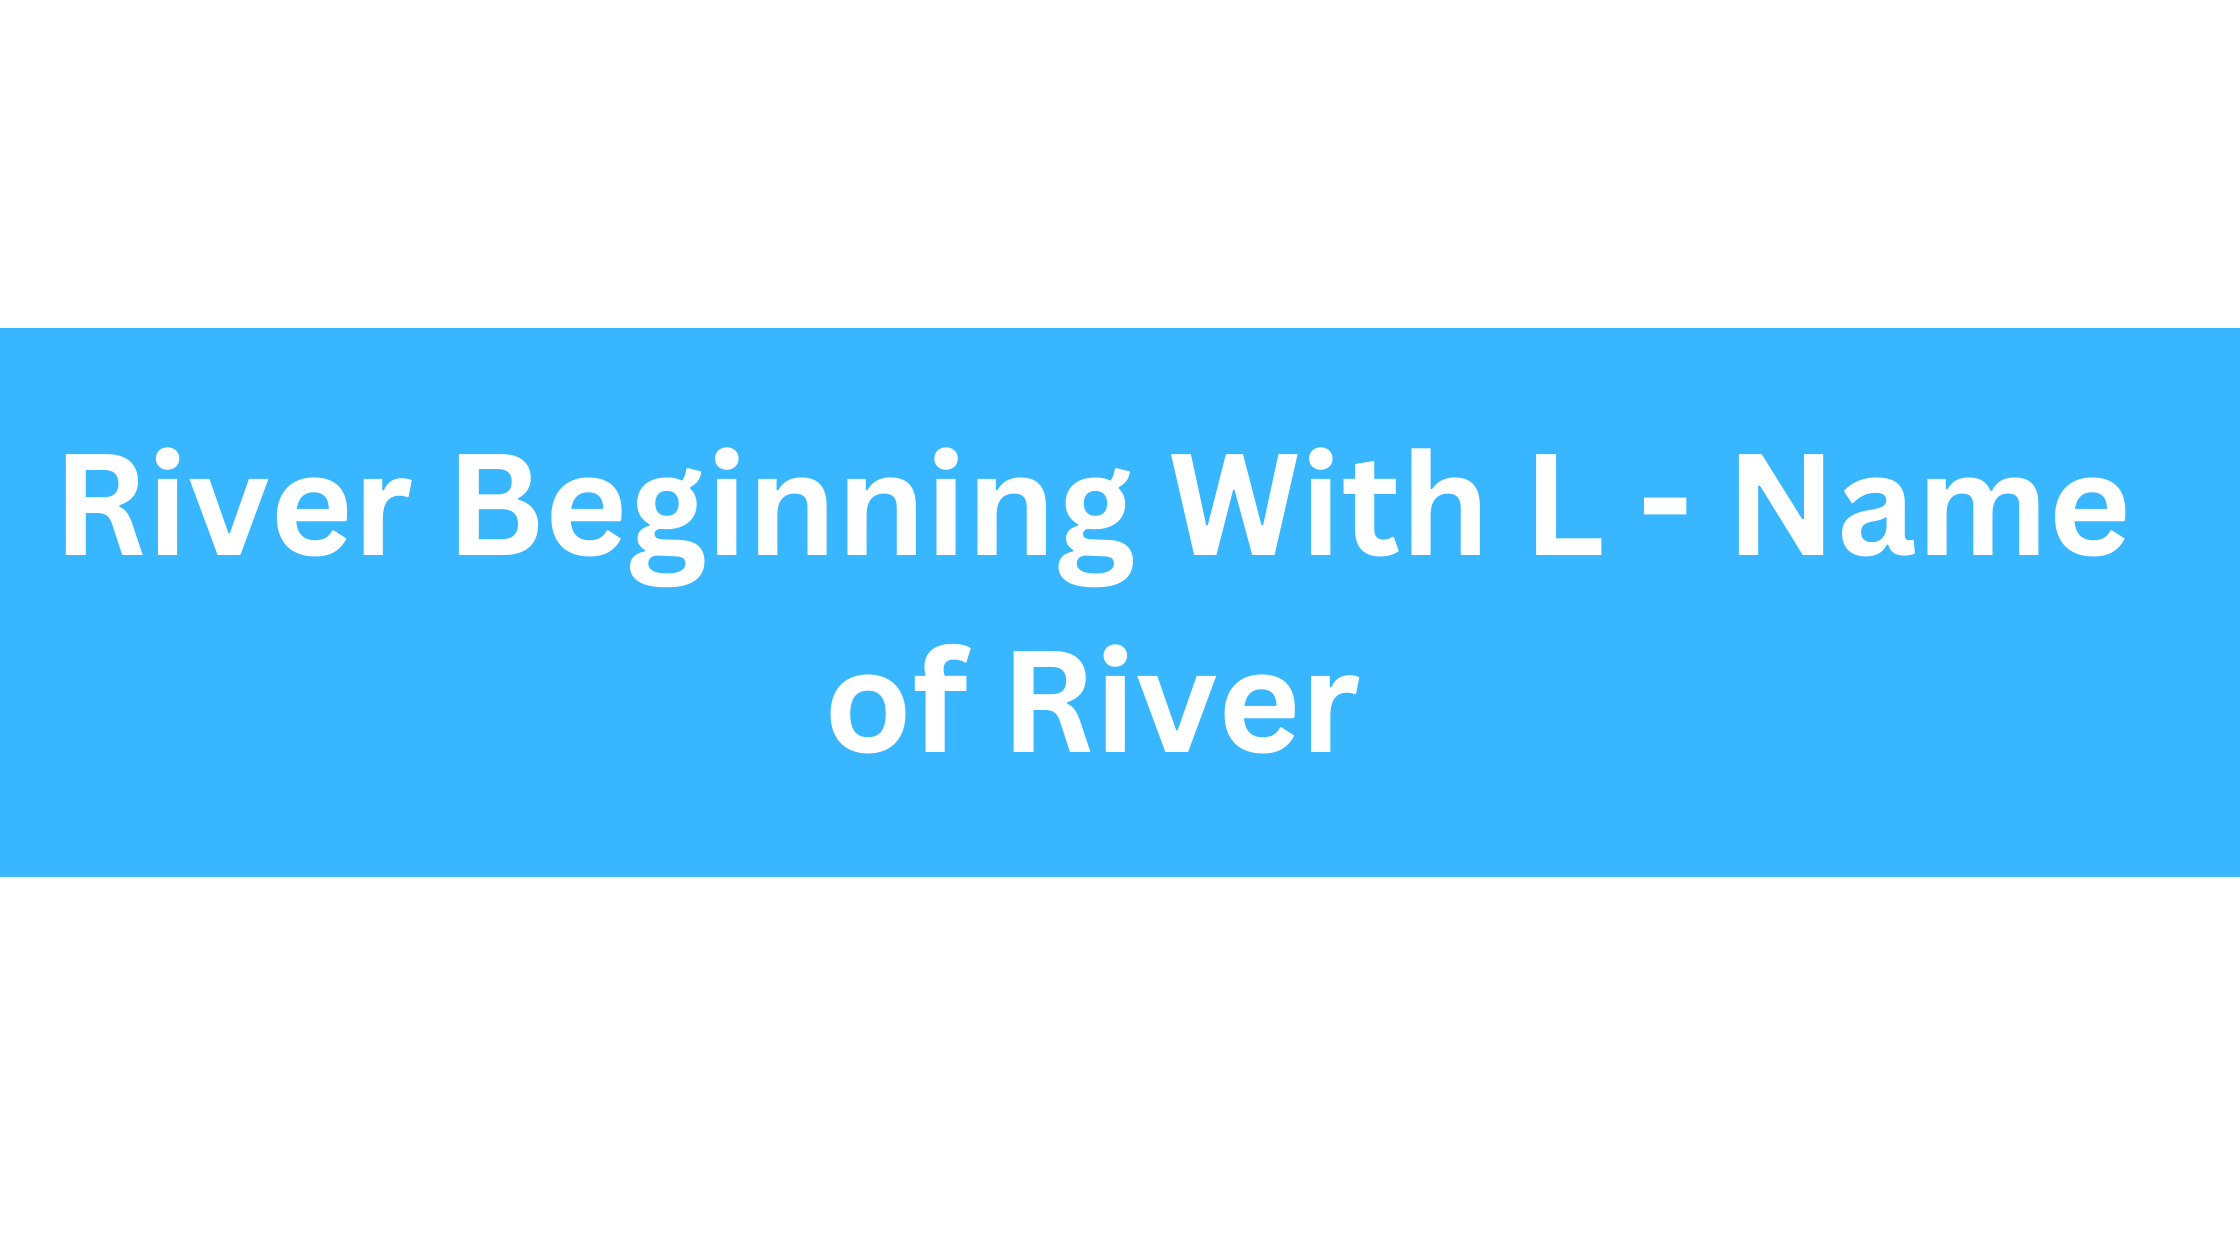 River Beginning With L